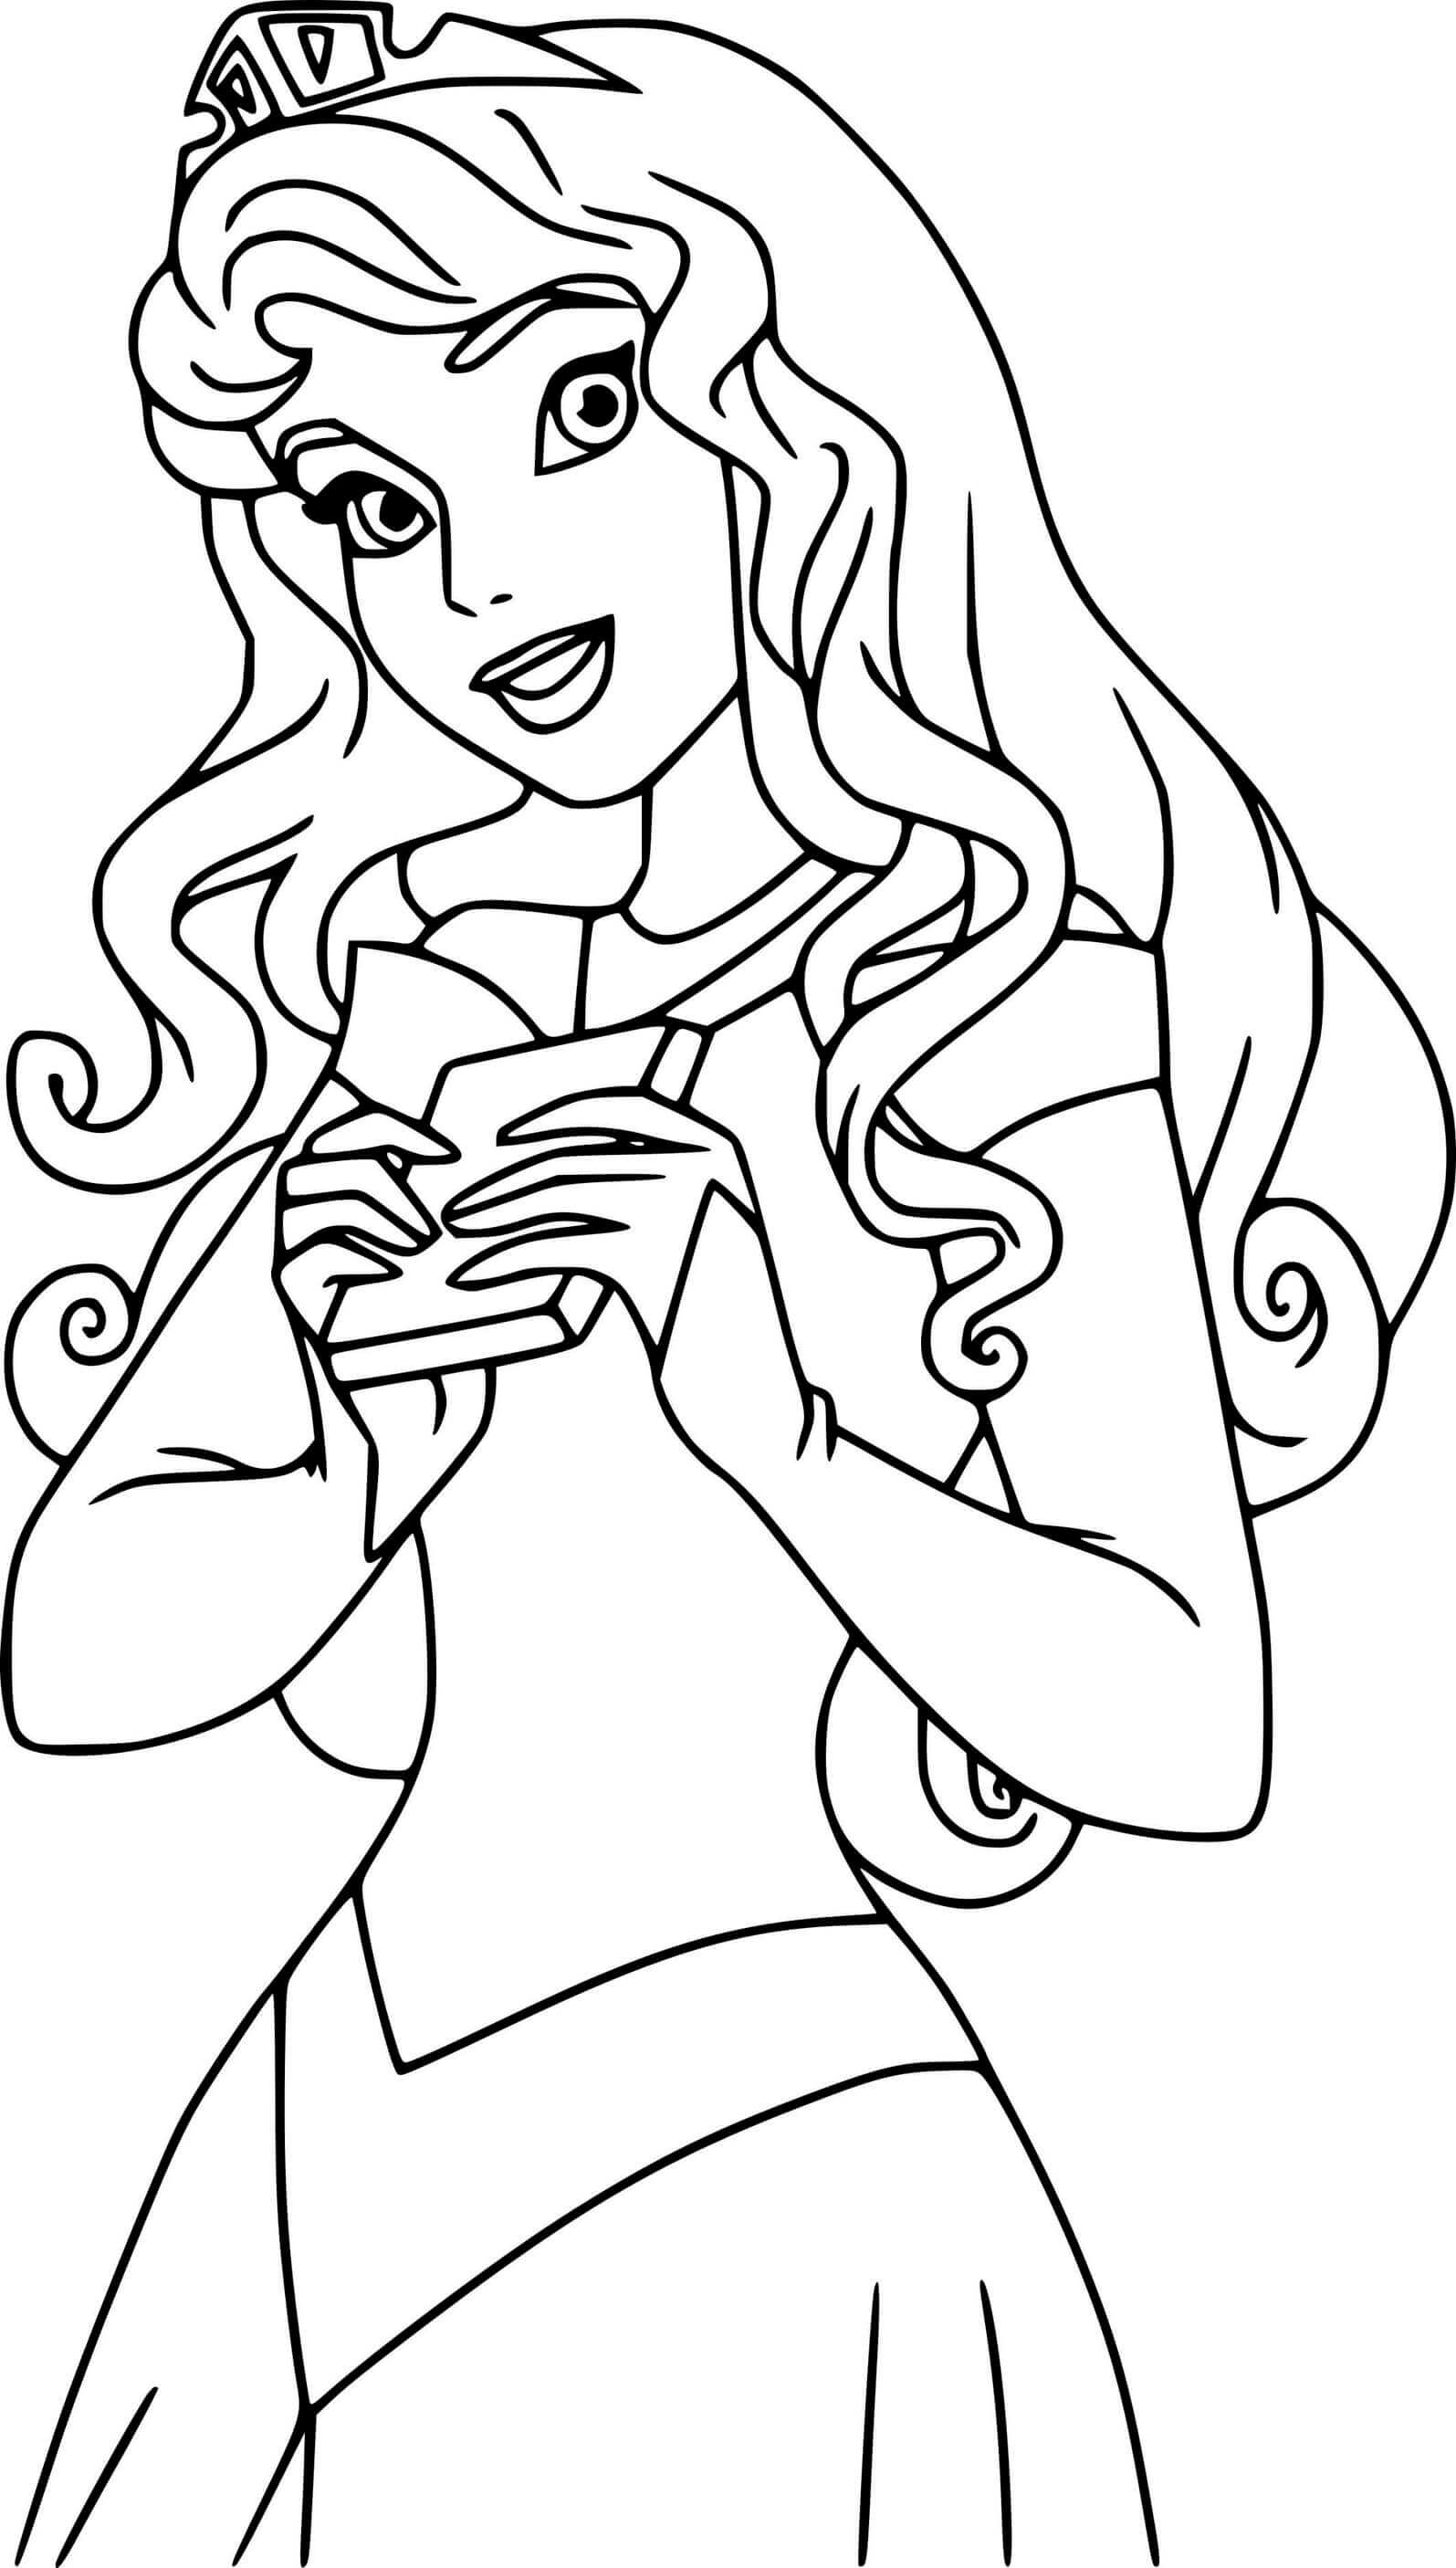 Aurora Holds A Book Disney Princess Coloring Pages   Coloring Cool